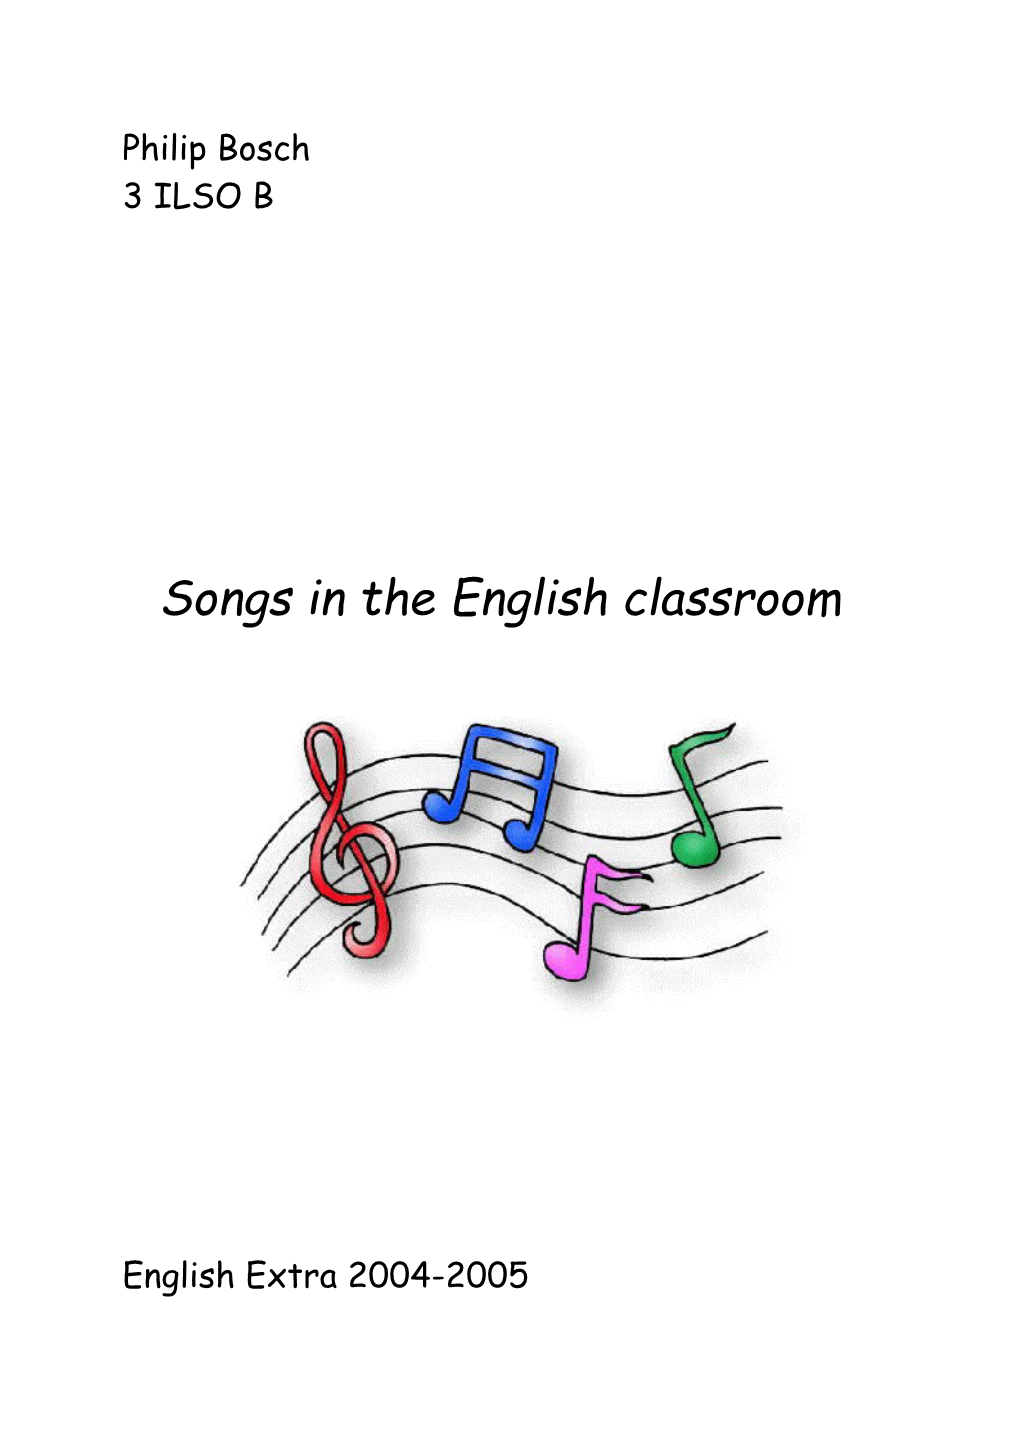 Songs in the English Classroom